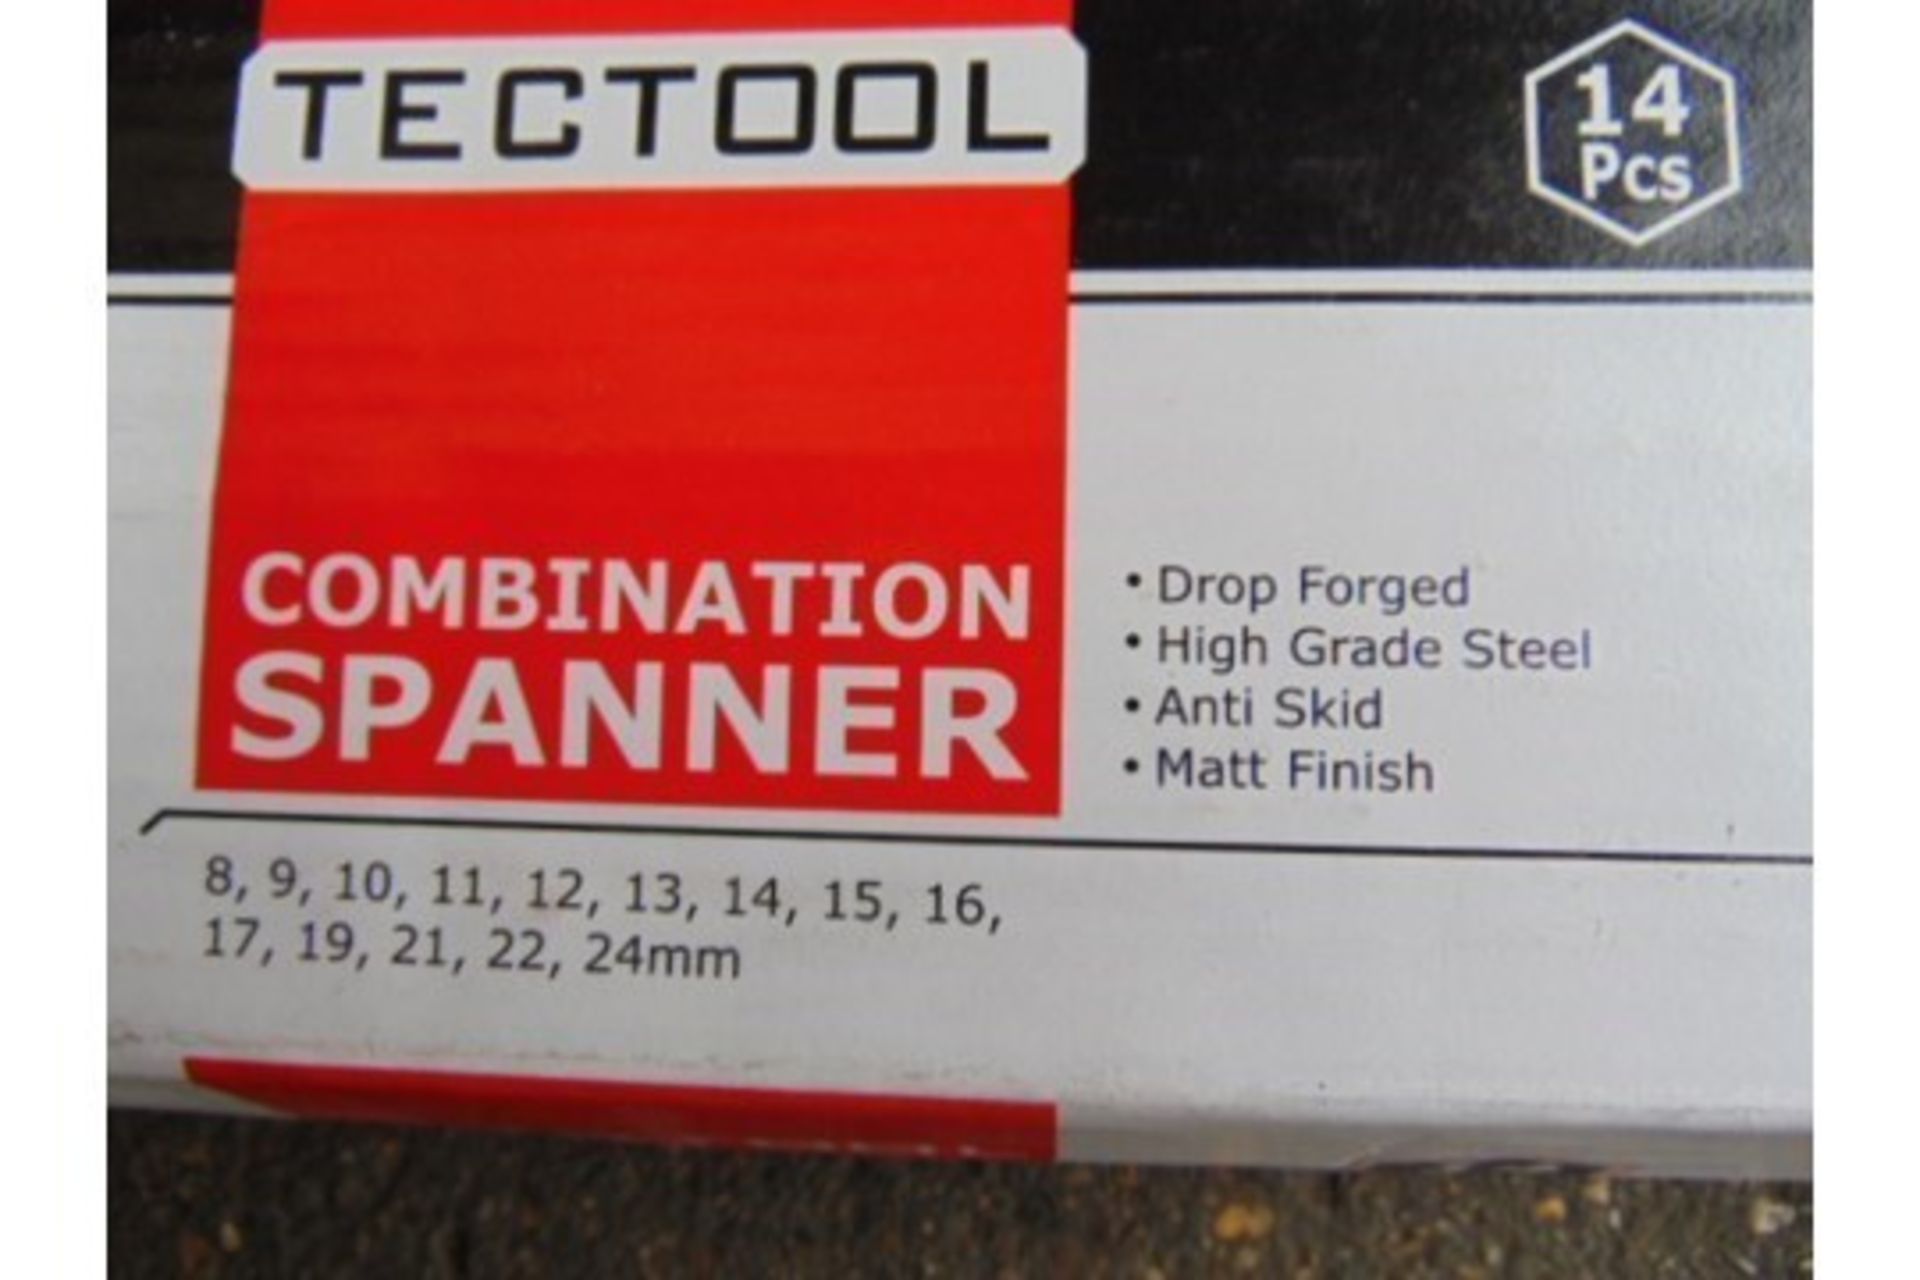 Unissued Tectool 14 pcs Combination Spanner Set - Image 4 of 4